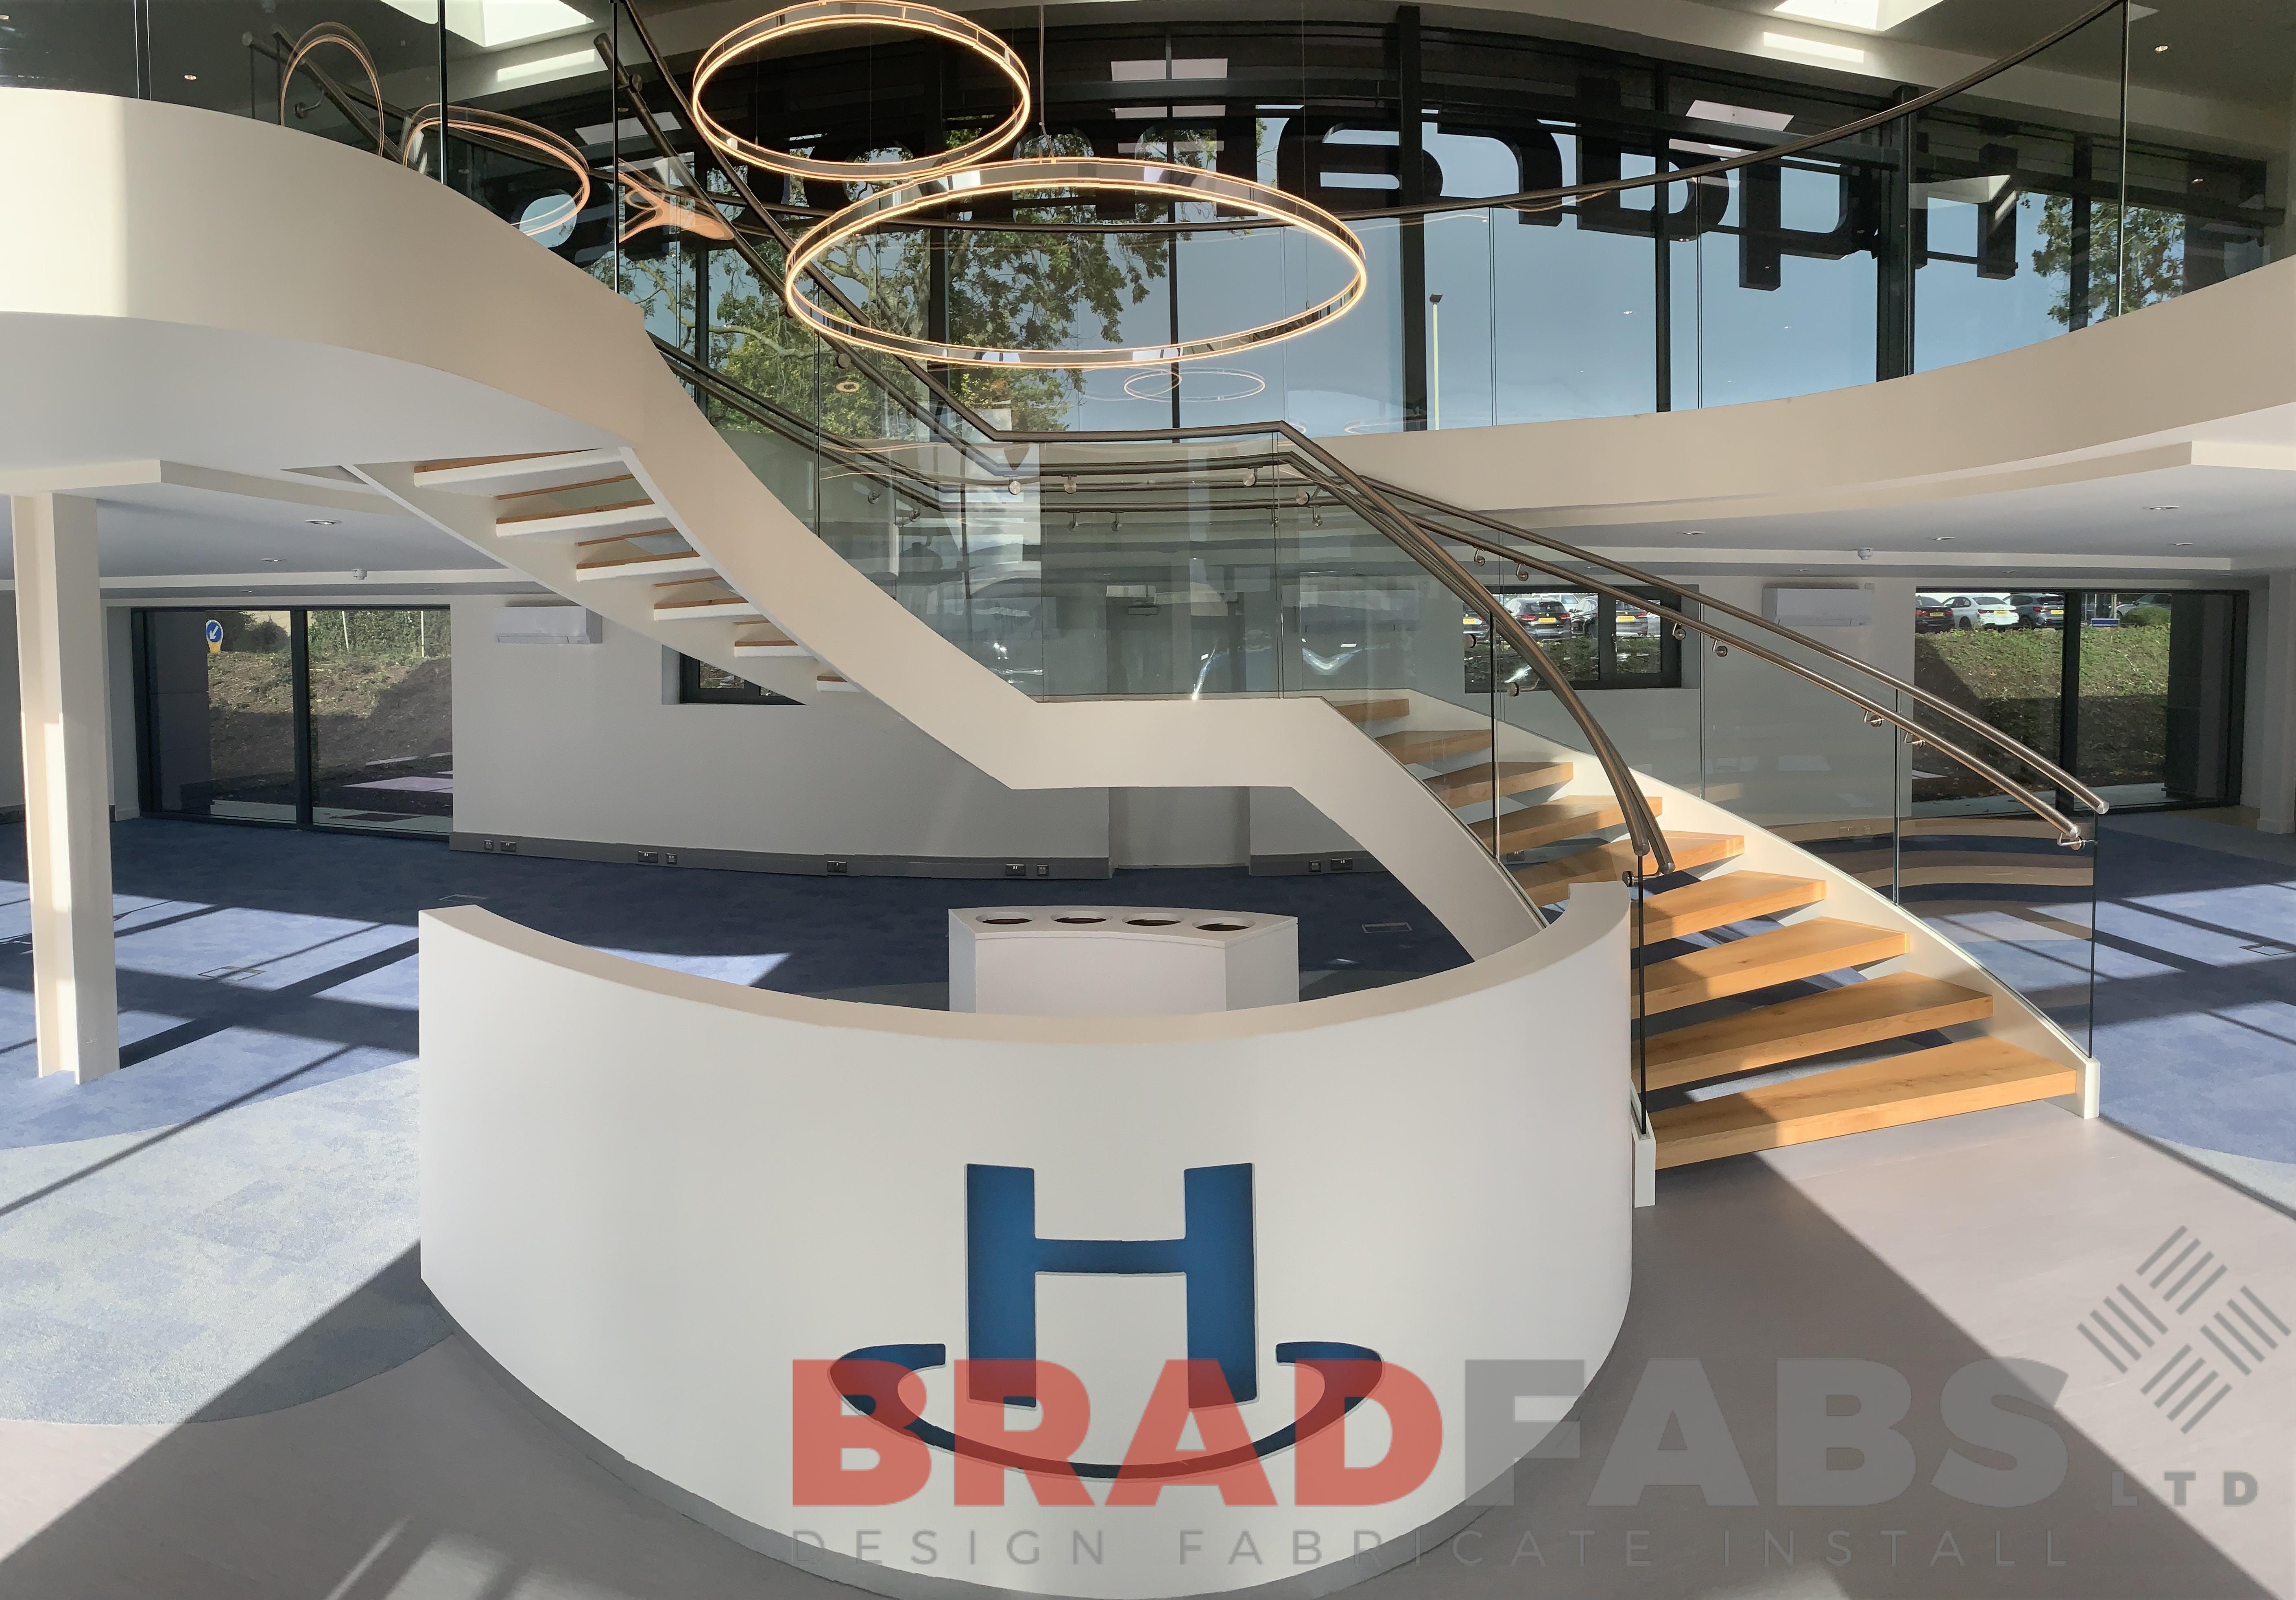 Bradfabs, helix staircase, helical stair, infinity glass, oak treads 